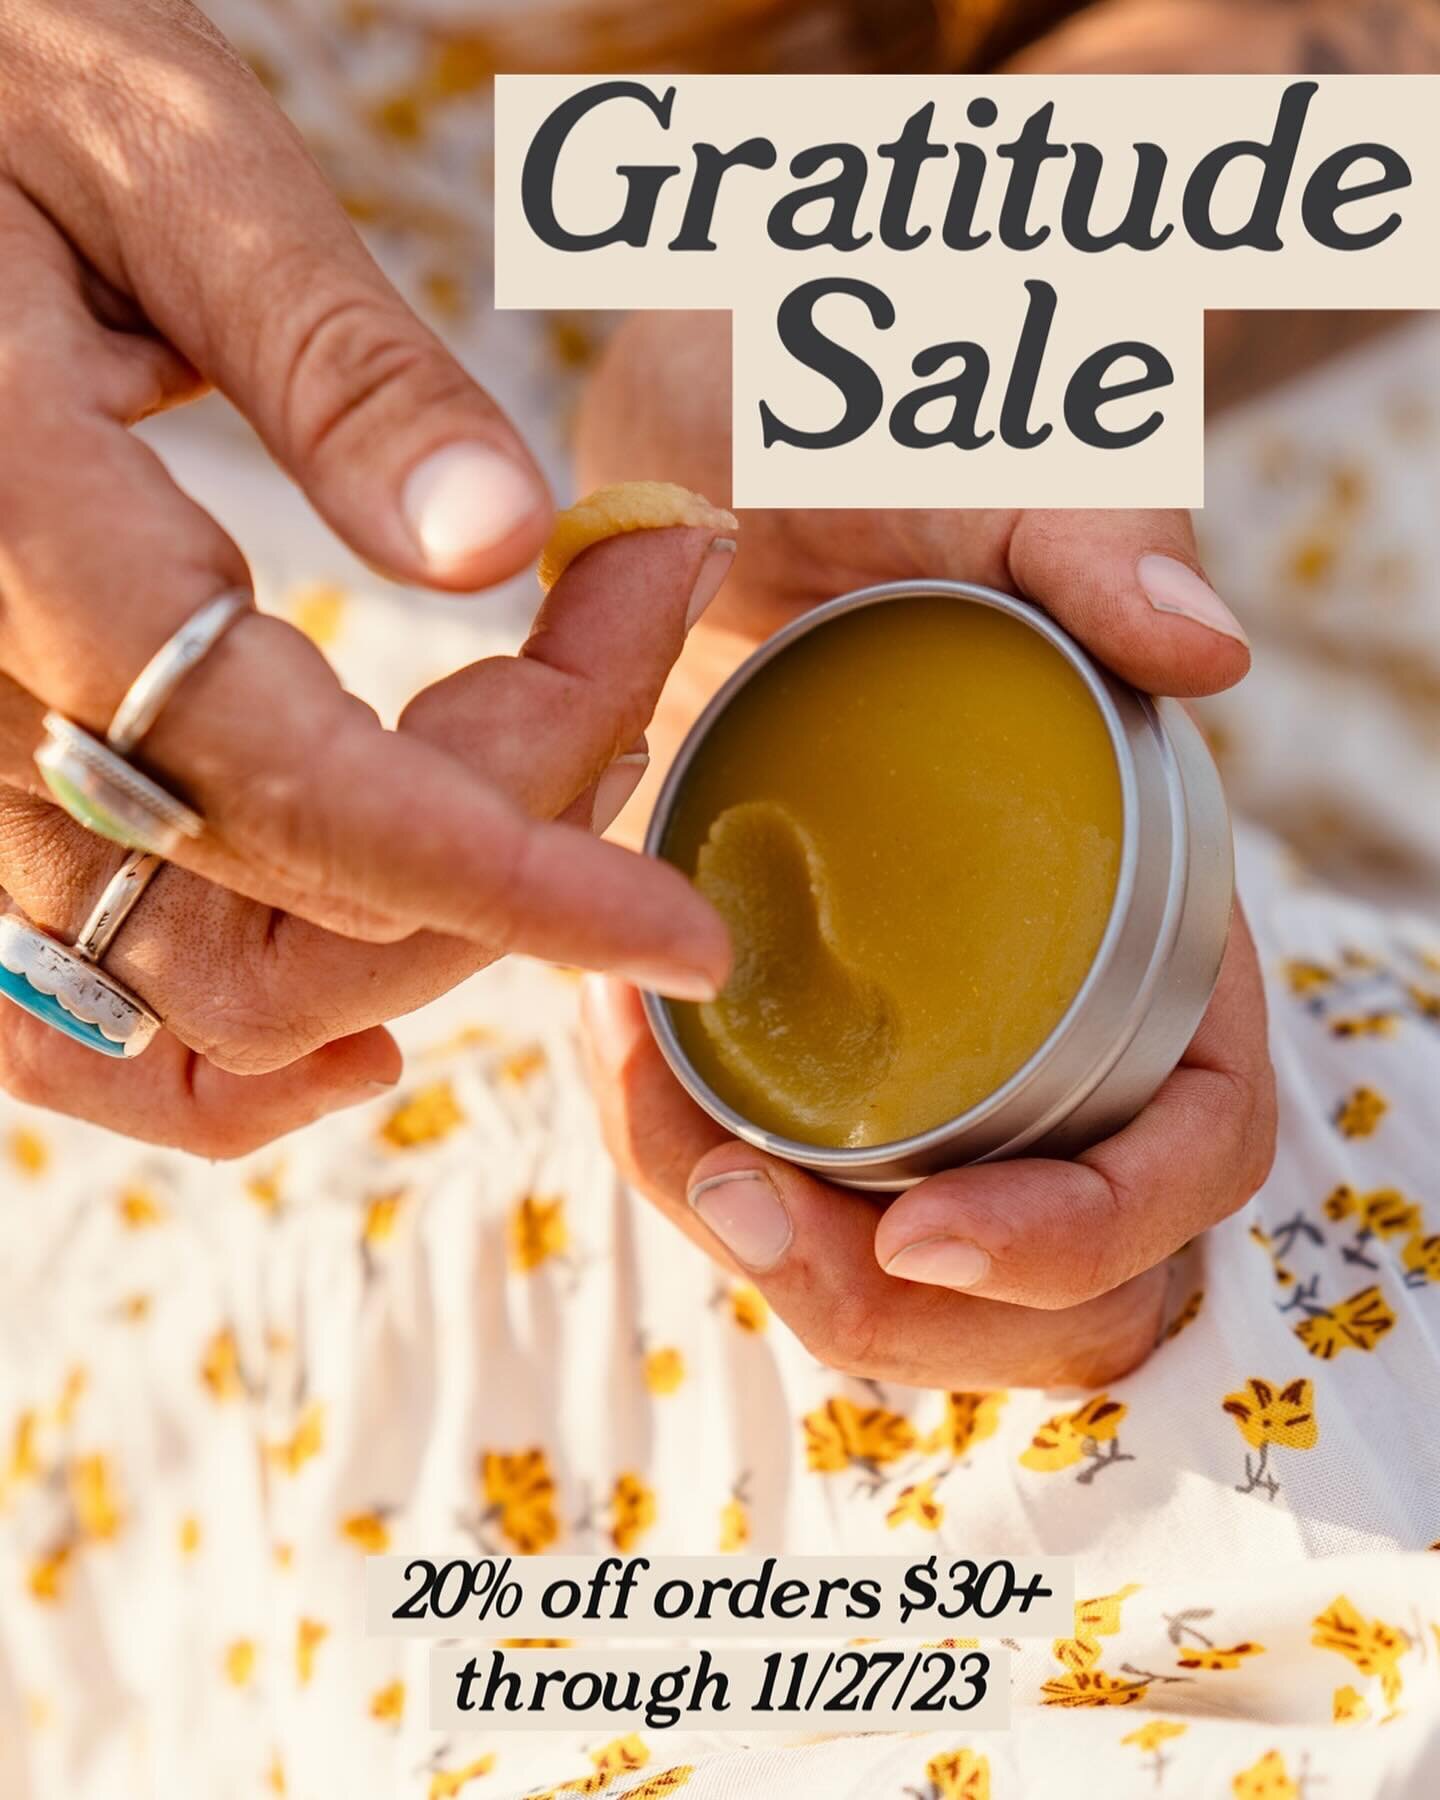 ✨ LAST CALL ✨

The Gratitude Sale is on at the Shop through the end of the day TODAY. 

SIDE RANT: It&rsquo;s strange to be on the sales bandwagon (especially when there&rsquo;s so much heaviness in the world). I&rsquo;m much more inclined to take ca